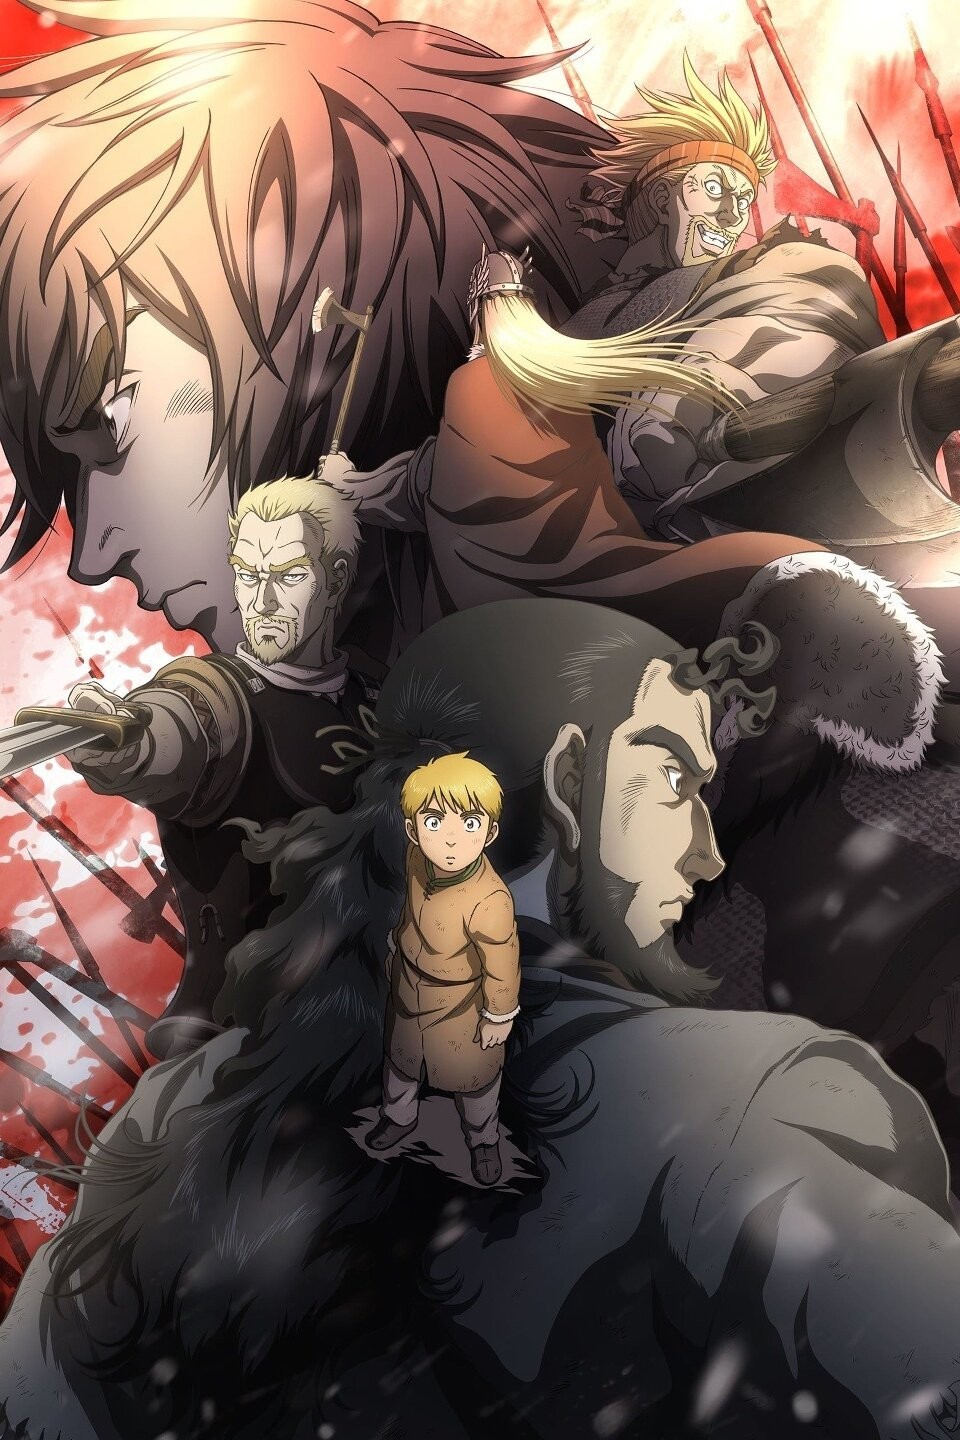 Vinland Saga Season 2 release date, time, streaming channel & everything we  know so far